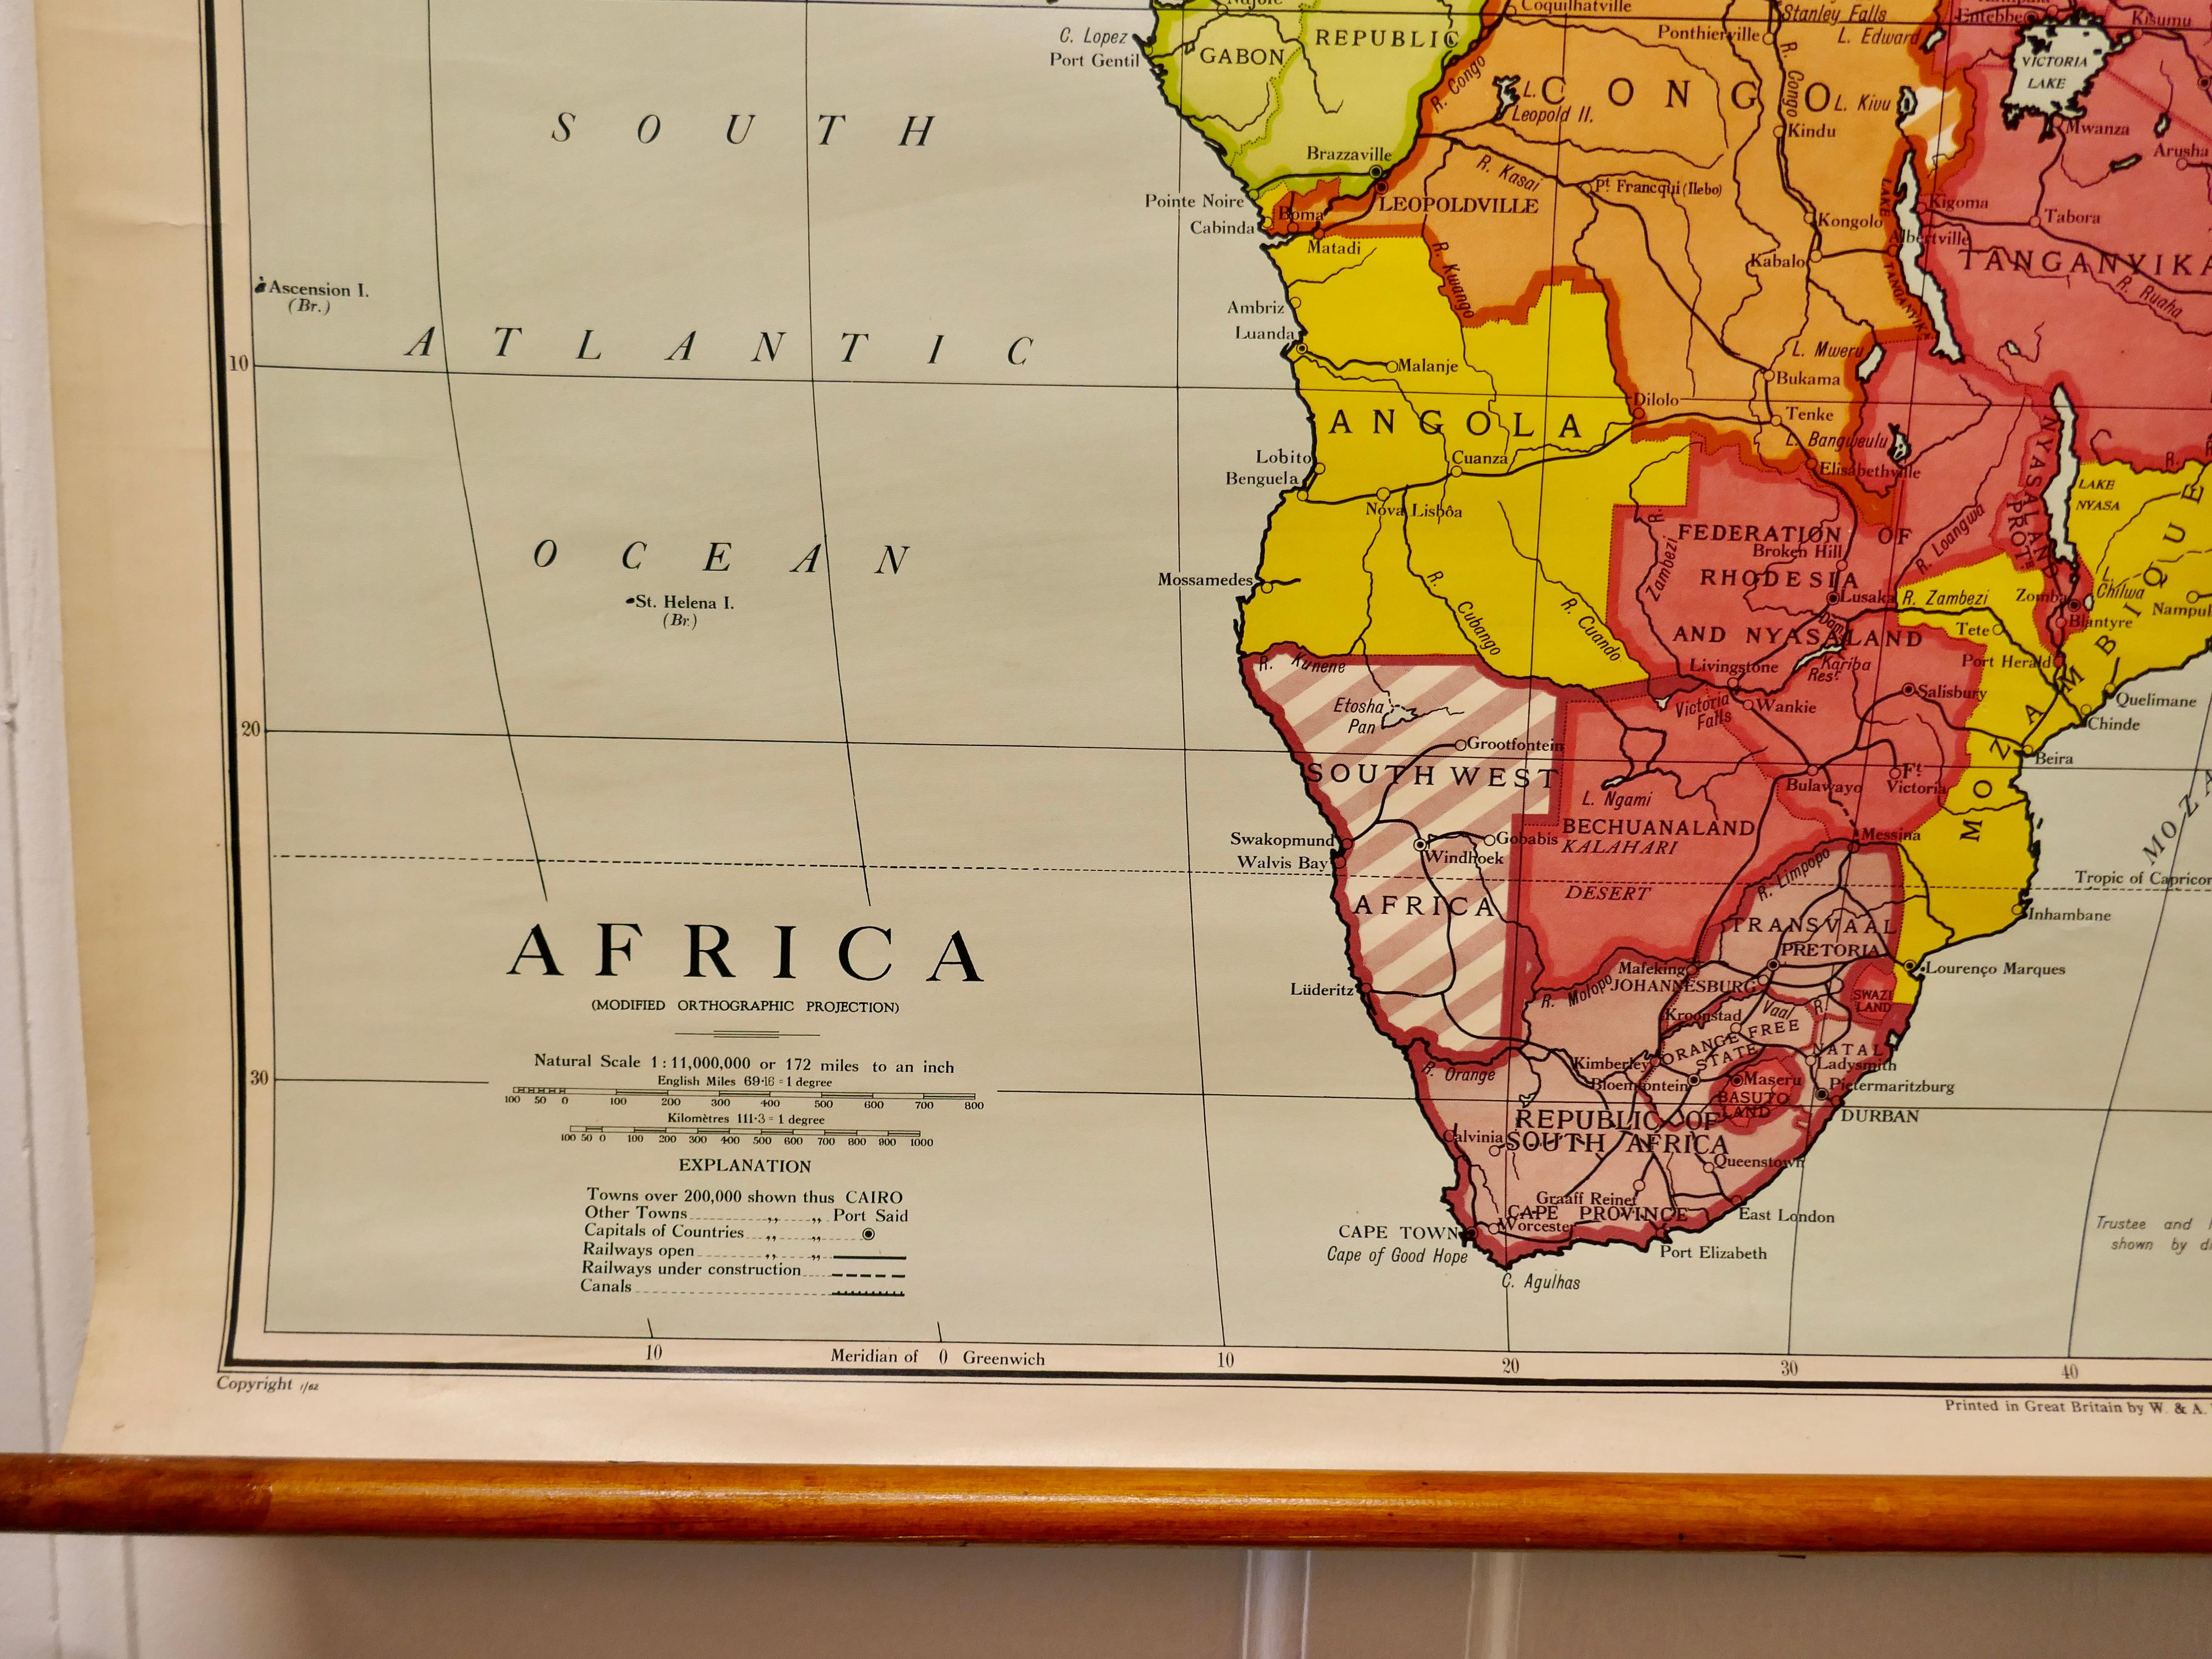 Large University chart “Africa Physical ” by Bacon

W&A K Johnston’s charts of physical maps by G W Bacon,

This is a Physical map of Africa, it is lithograph set on Linen mounted on wooden rods, the chart is in very good bright condition, it is